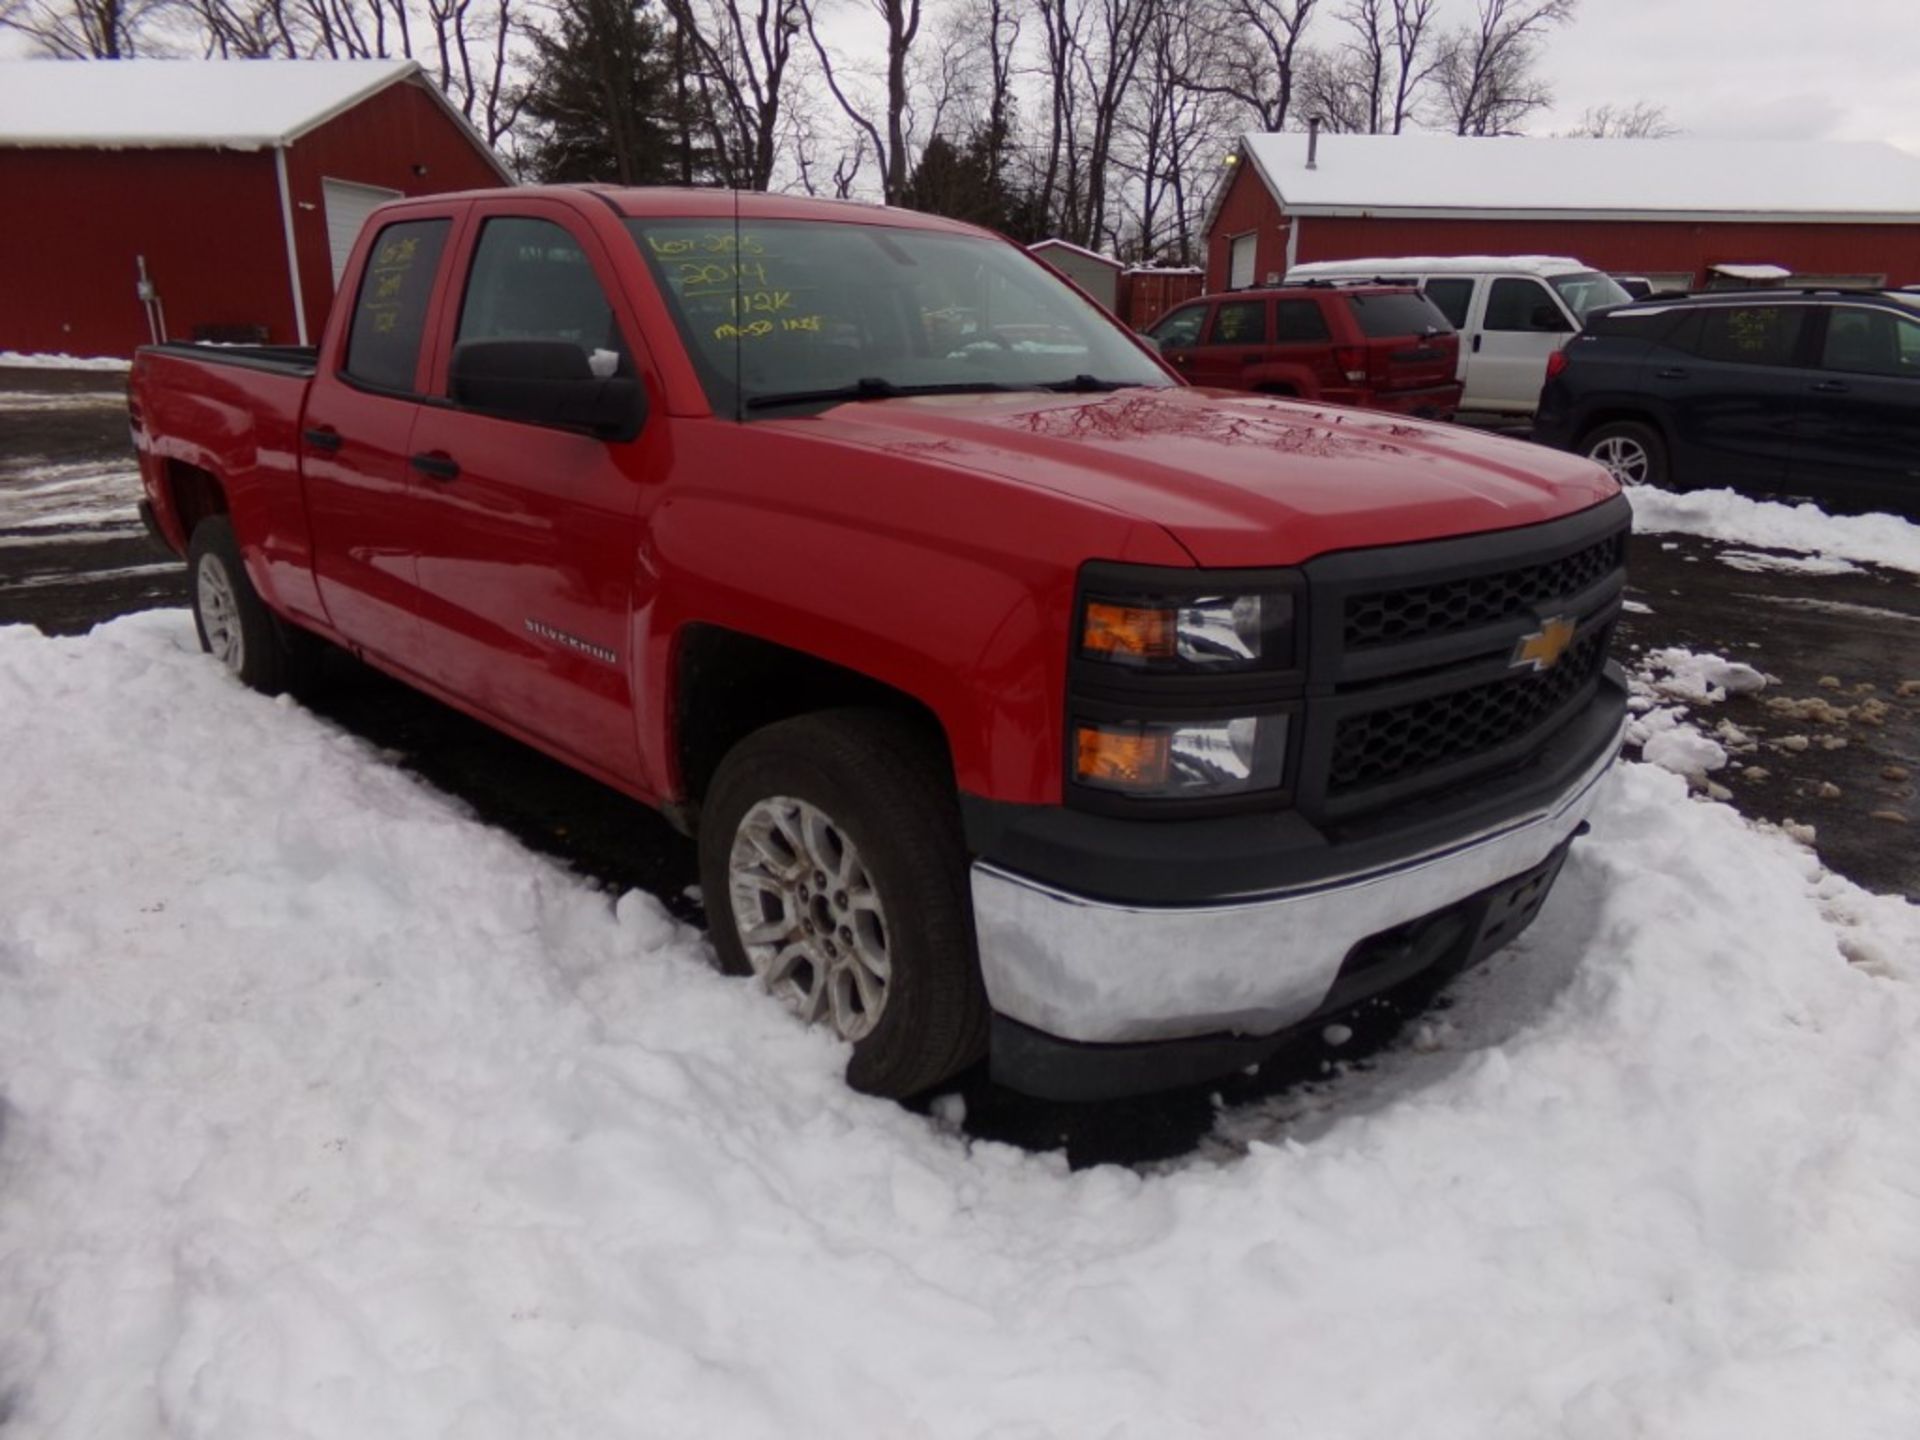 2014 Chevrolet Silverado 1500 4X4, Double Cab, Aftermarket Tail Lights, Toneau Cover, W/T, Red, - Image 4 of 11